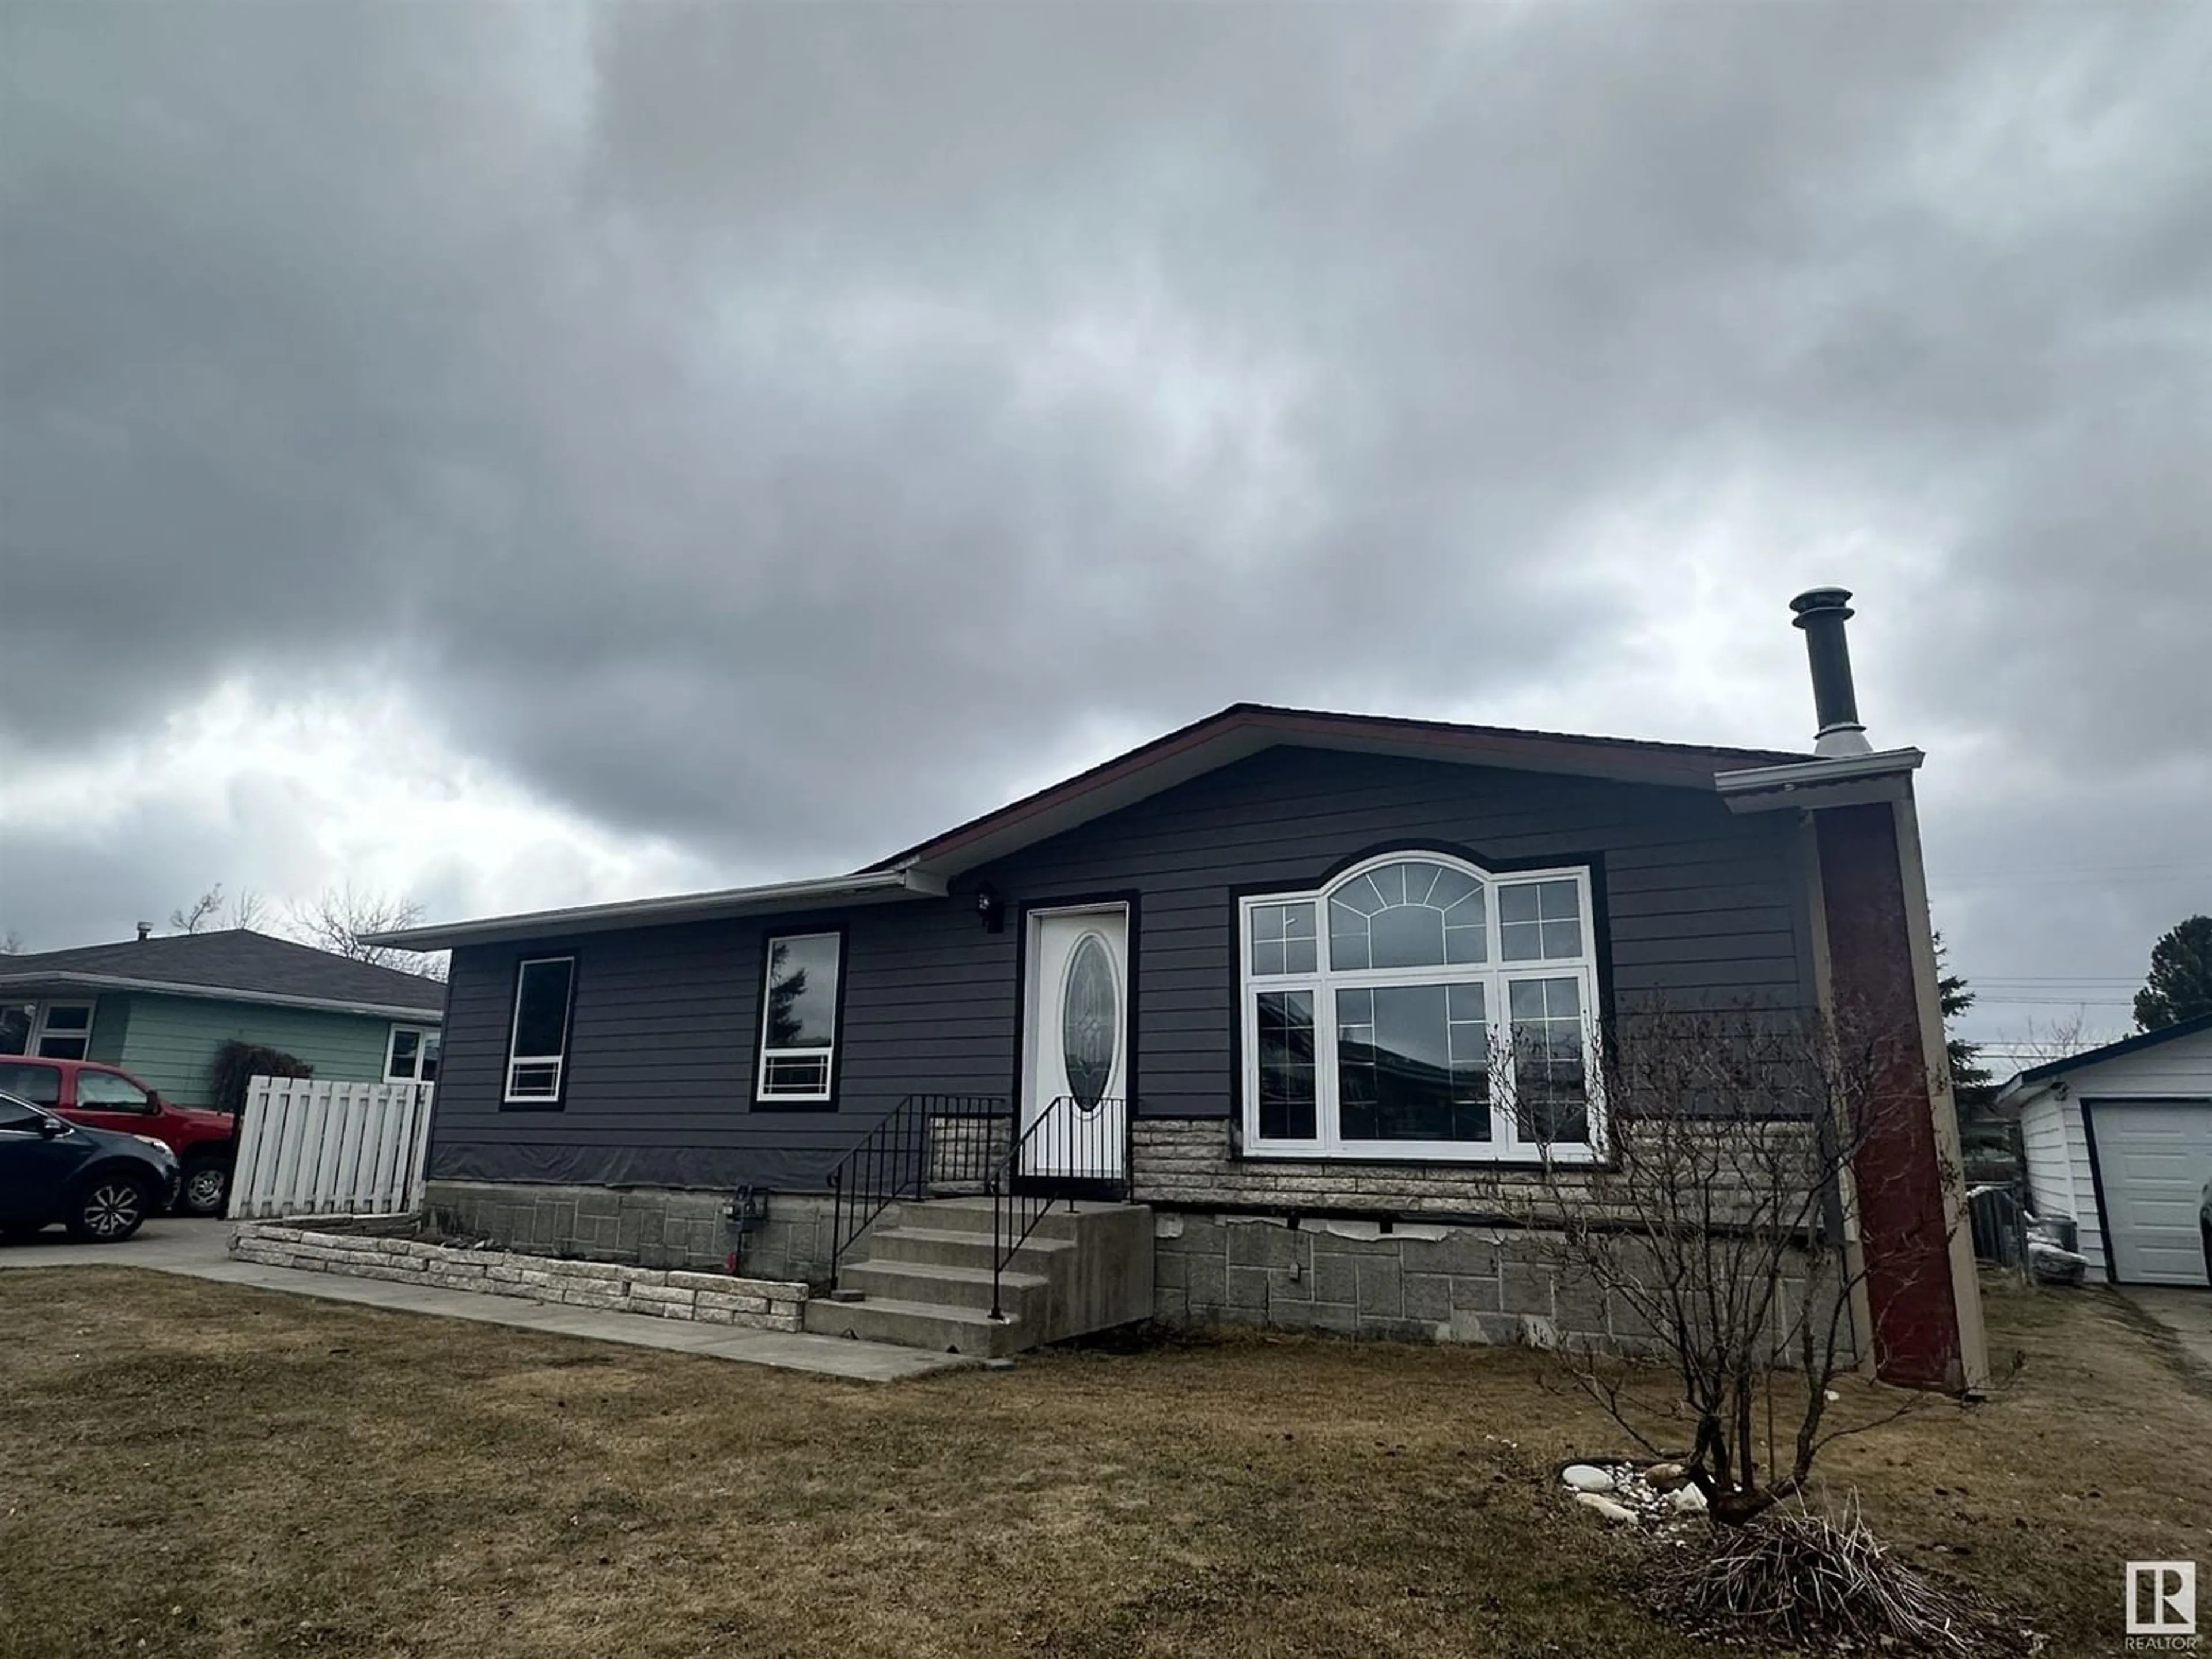 Frontside or backside of a home for 27 CENTENIAL CR, Swan Hills Alberta T0G2C0